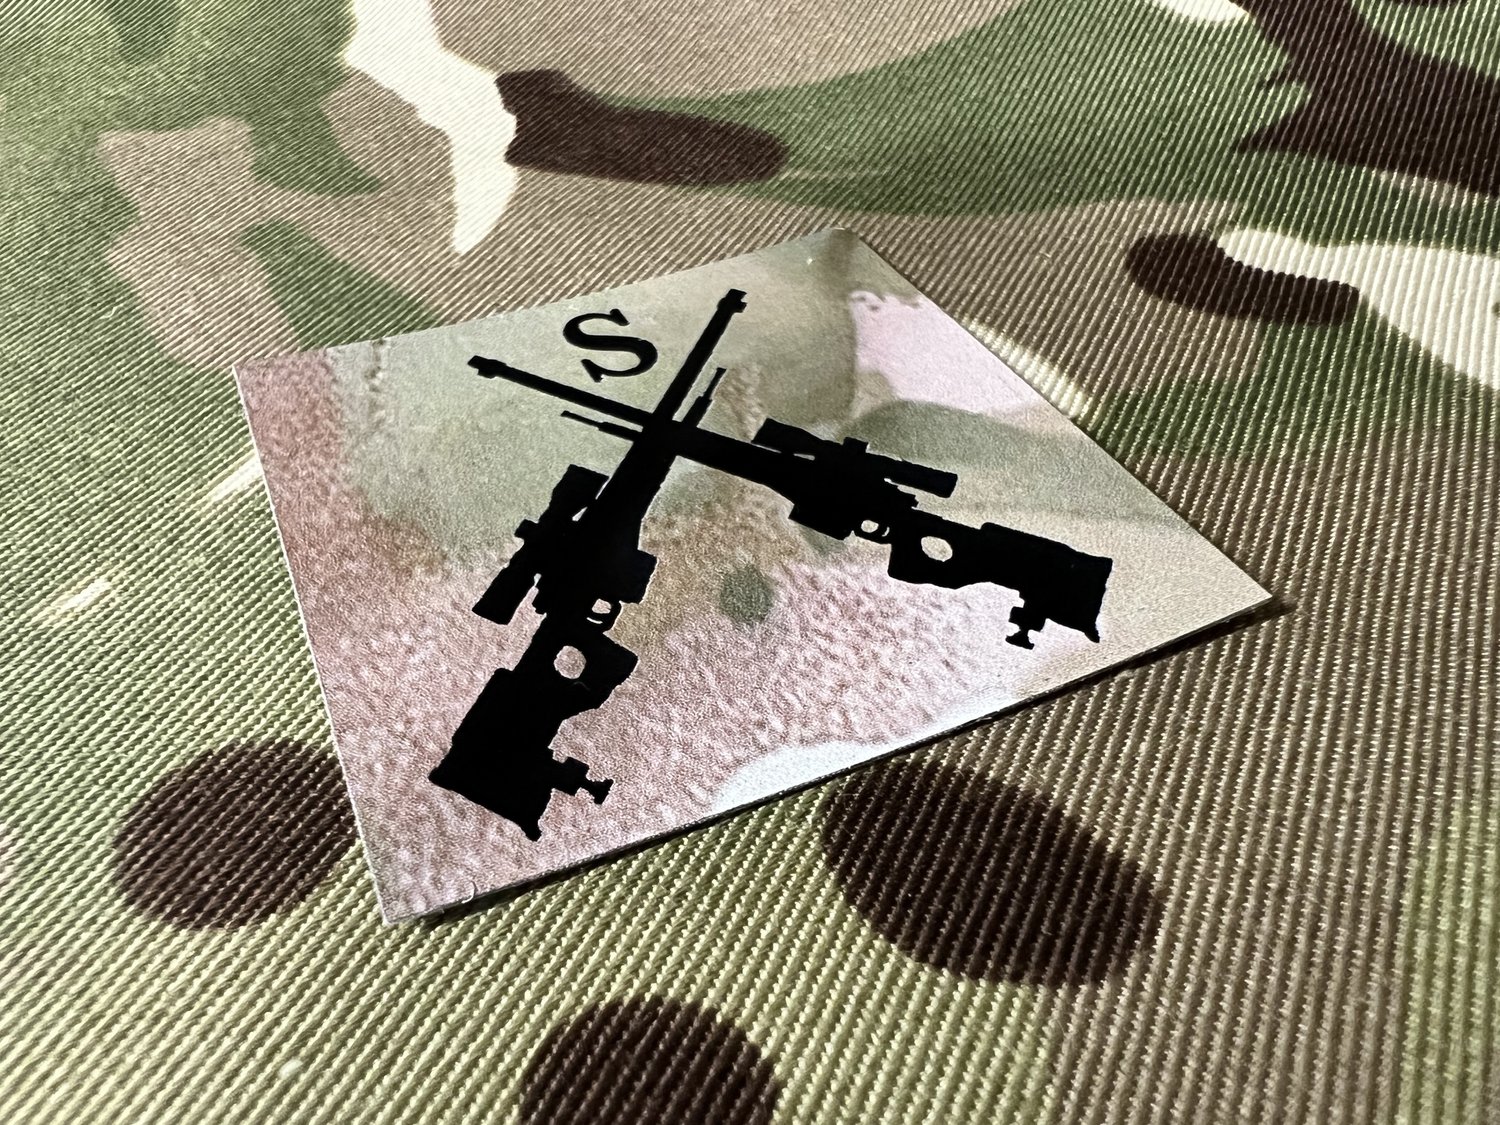 Infrared (IRR) MEDIC Flash, TRF/IFF Patches